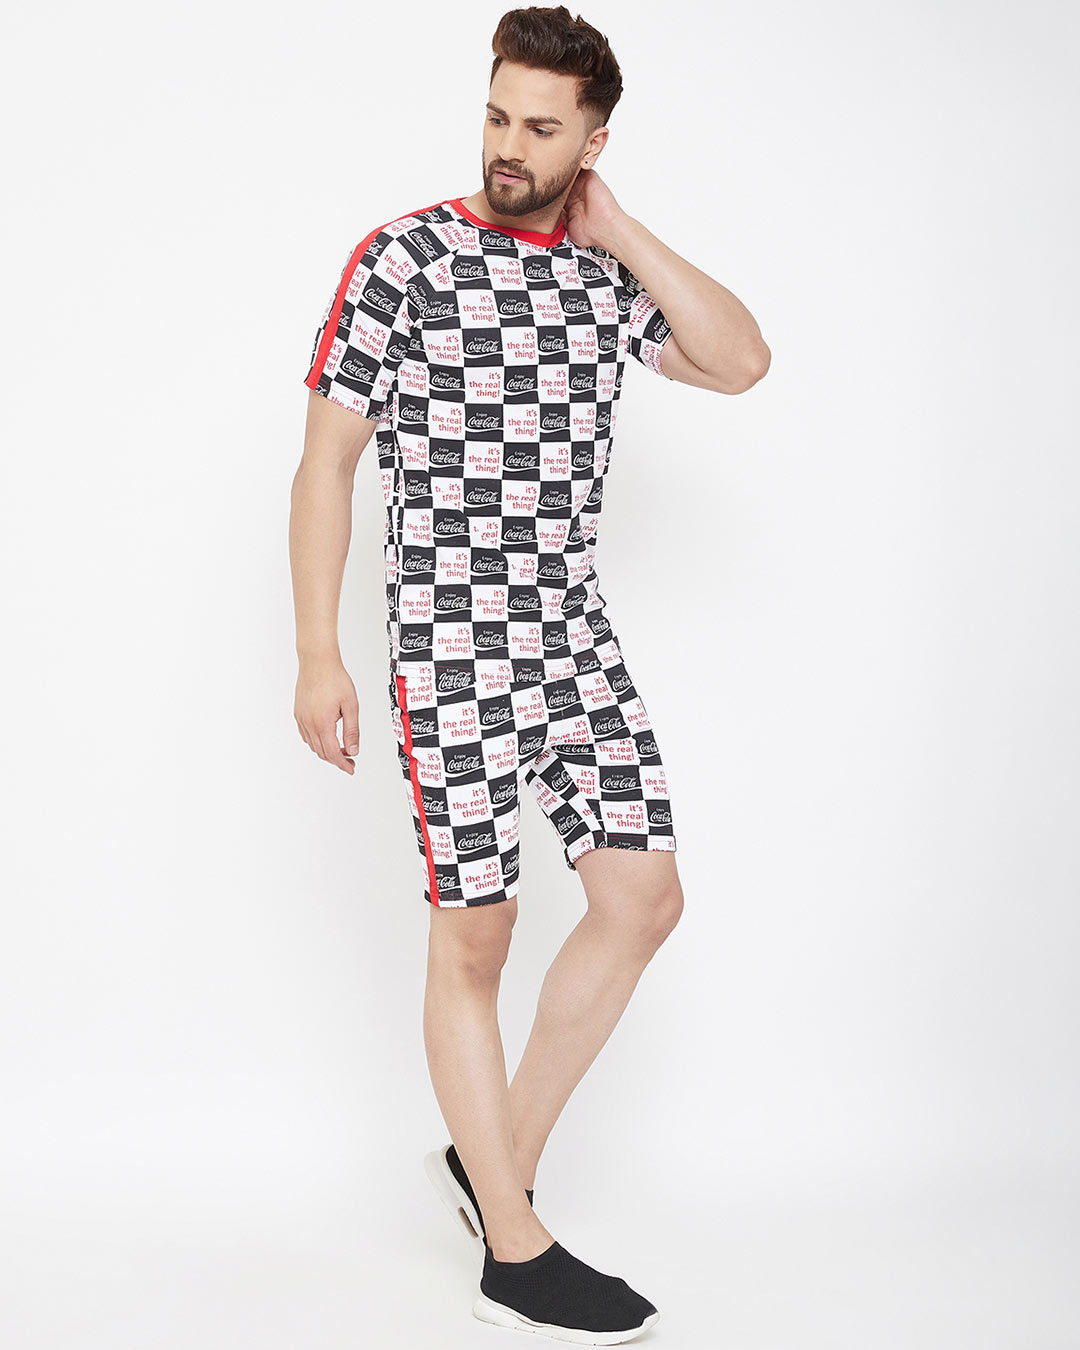 Shop Cocacola Checkered Printed T-Shirt And Shorts Combo Suit-Back